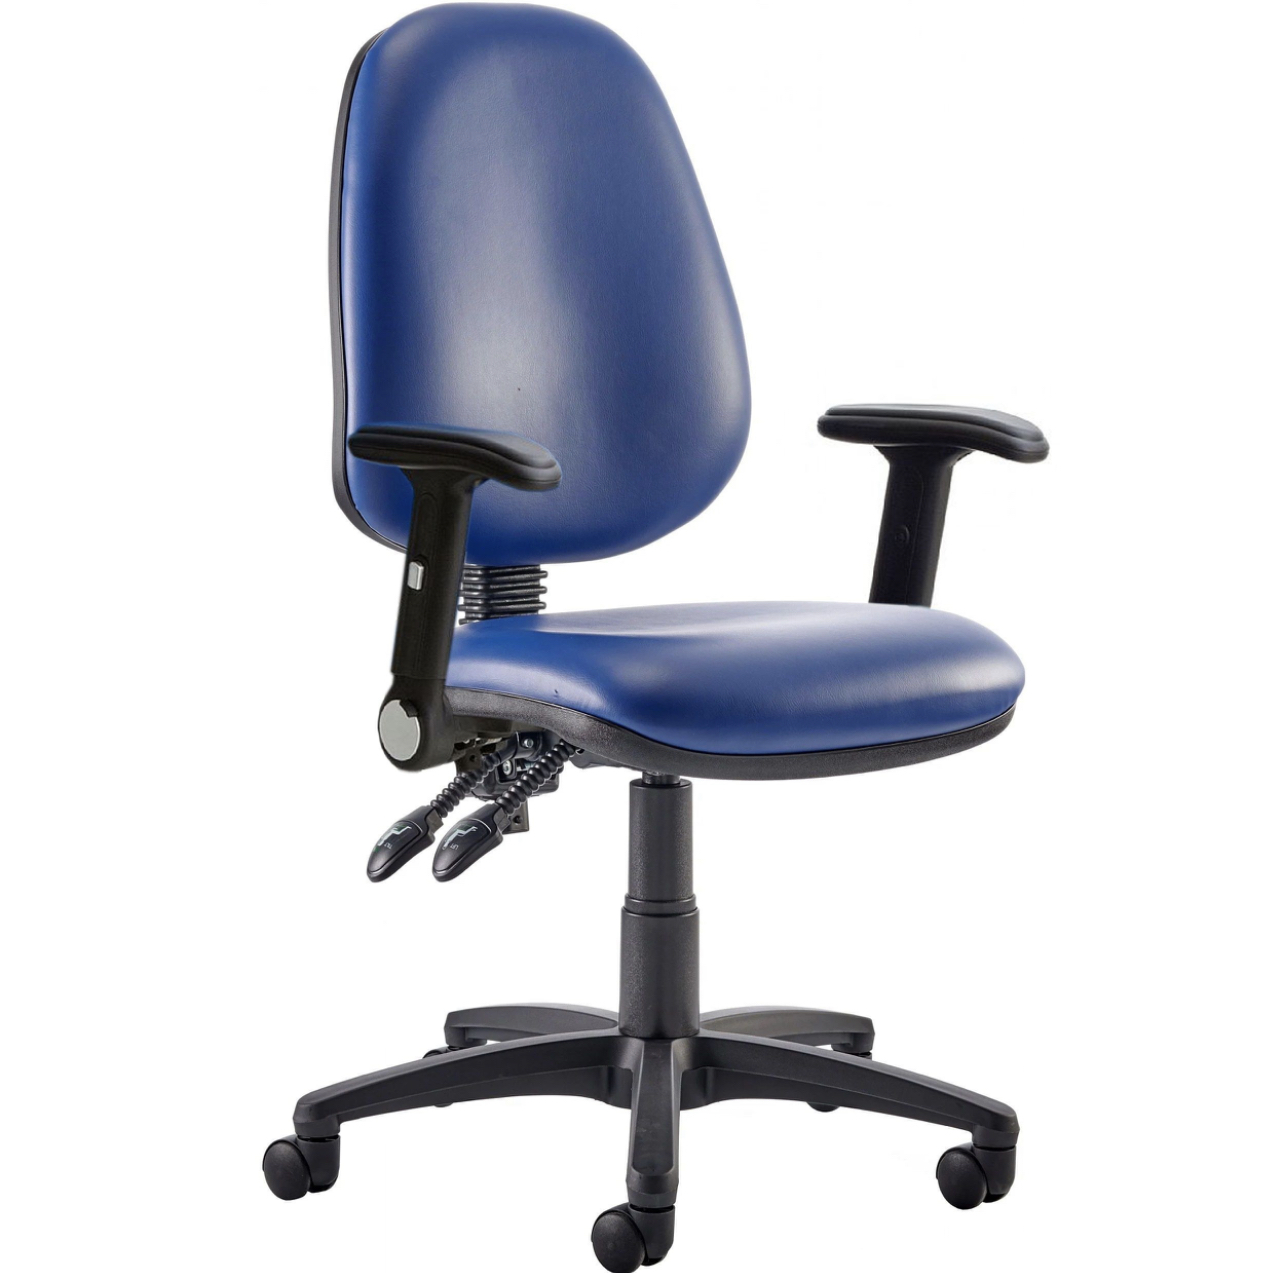 Kirby High back 2 lever vinyl operators chair blue with loop arms